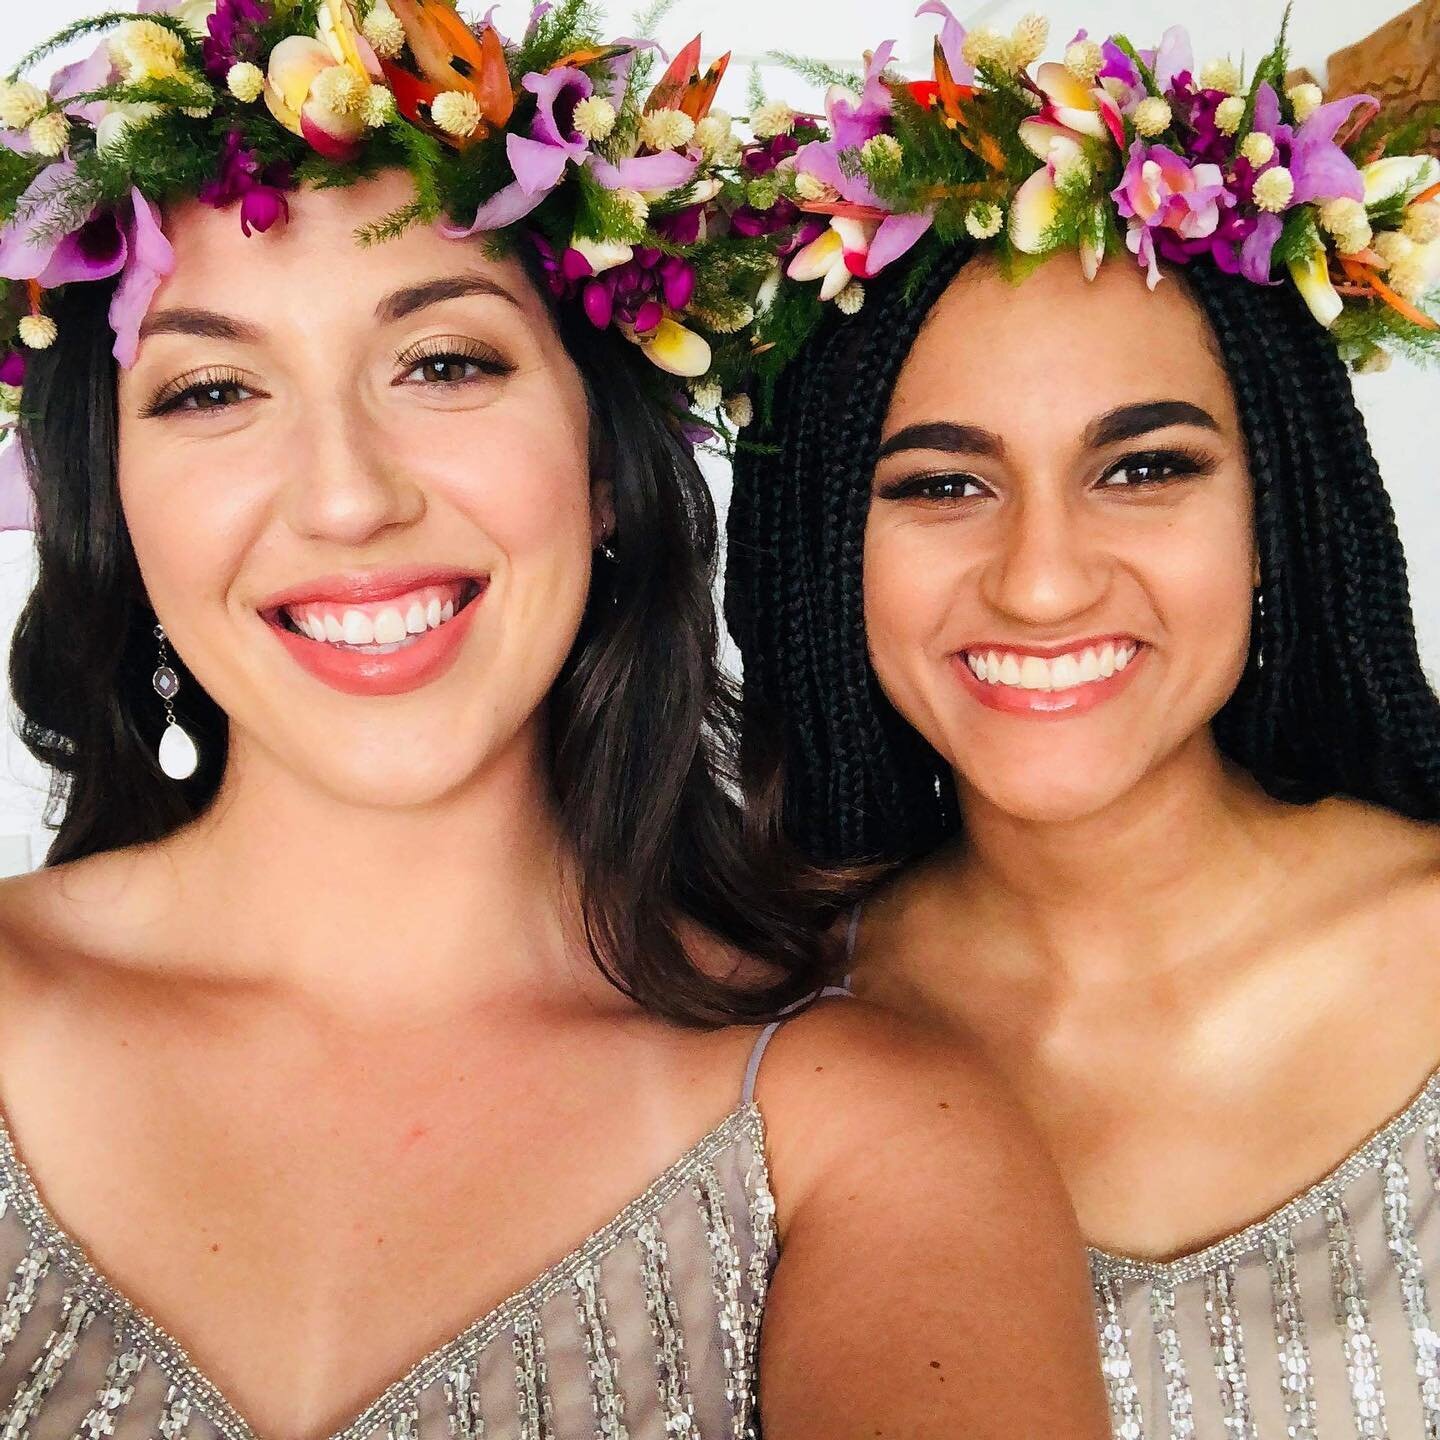 I love how these 100% real flower crowns look like a filter😂⁠⁠
⁠⁠
#tenzichacha⁠⁠
#nofilter⁠⁠
#samoa⁠⁠
#flowercrown⁠⁠
#islandlife⁠⁠
#wedding⁠⁠
#bridesmaid⁠⁠
#sequins⁠⁠
#friends⁠⁠
#smile